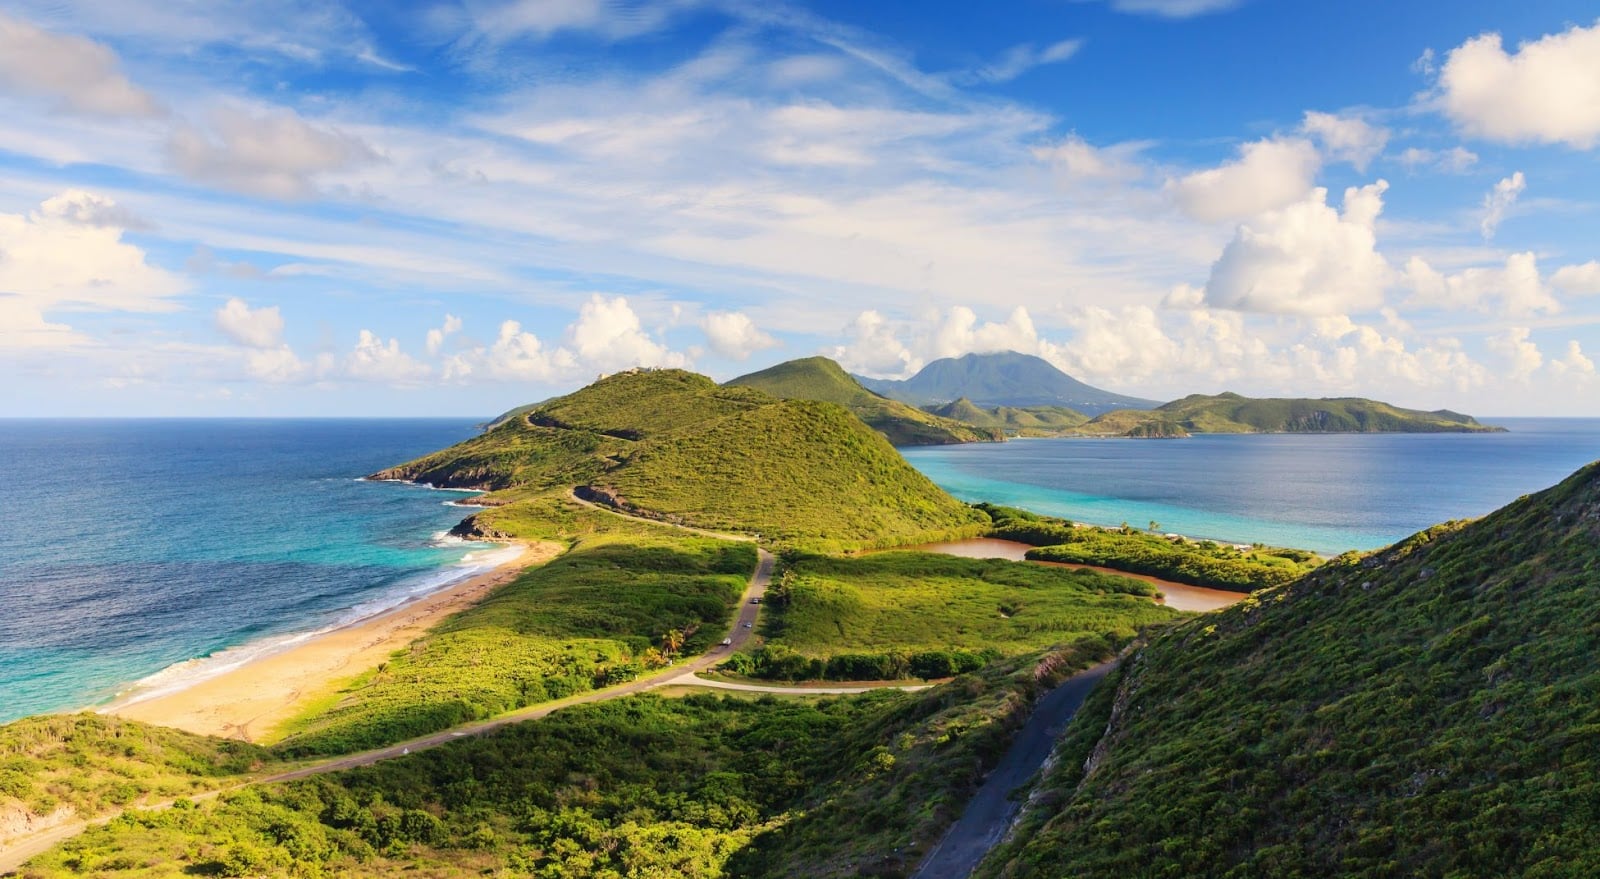 A panoramic view of St. Kitts with the Atlantic Ocean to the left and the Caribbean Ocean to the right